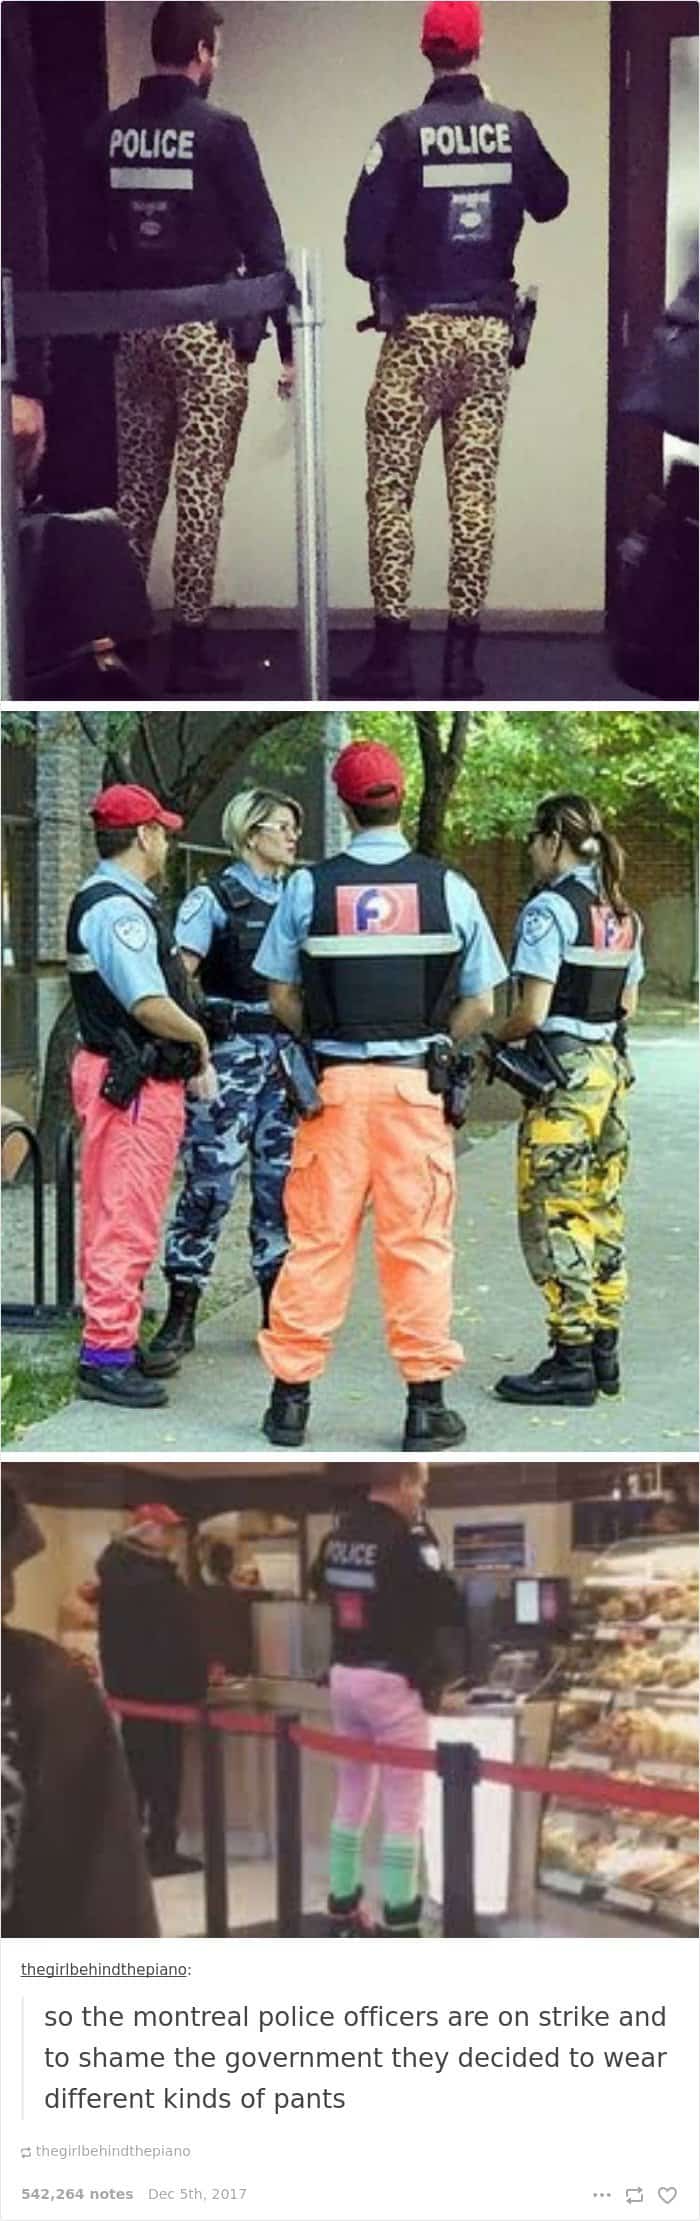 Funny Images About Canada pants